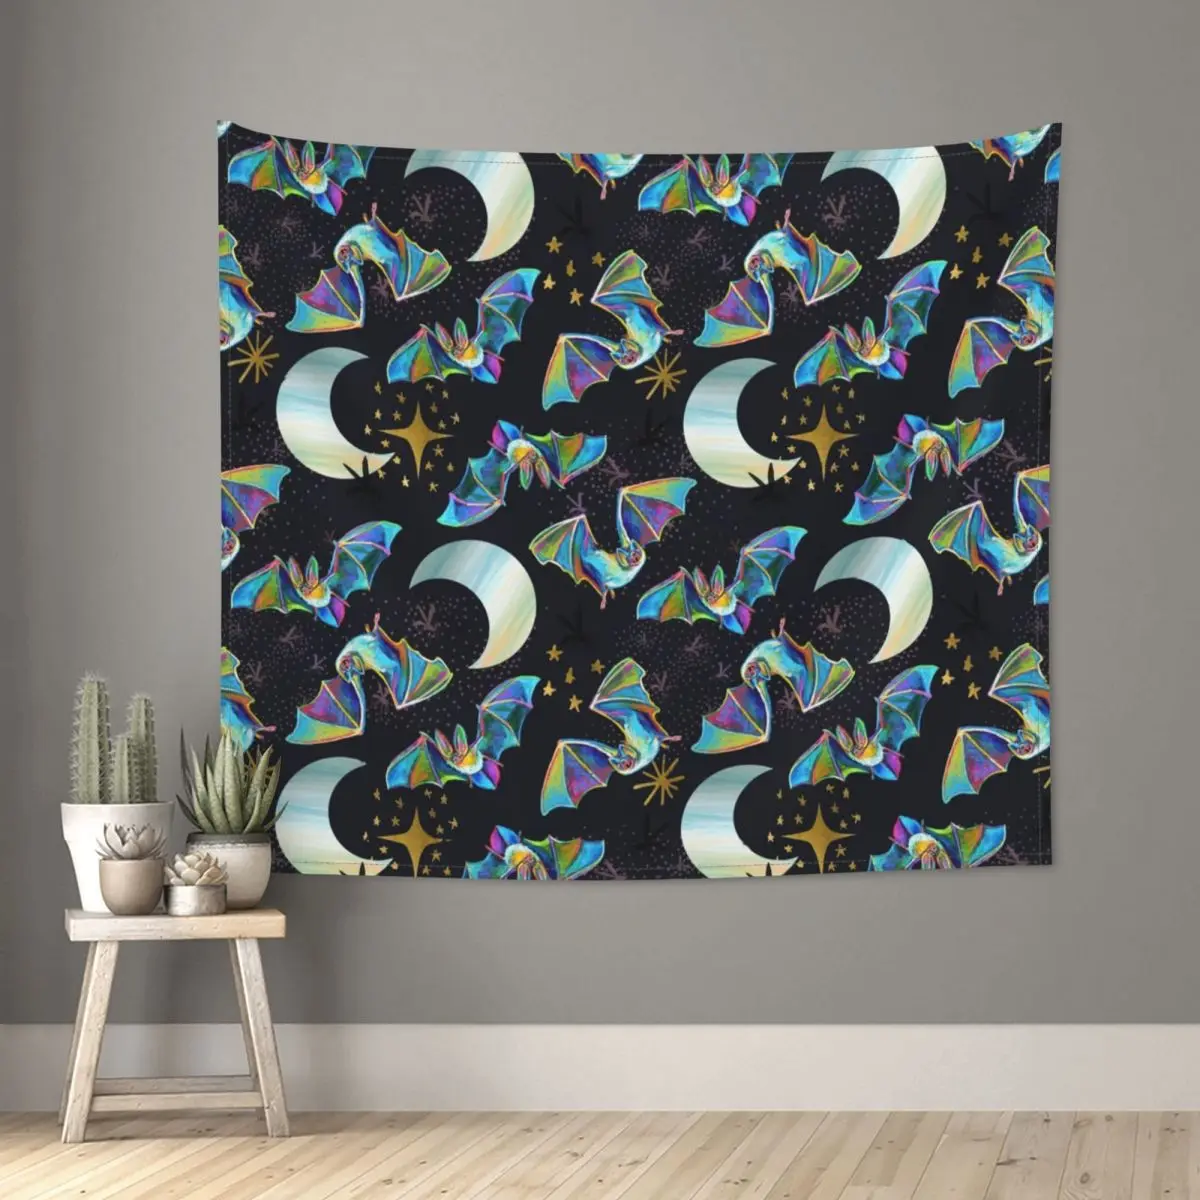 

Creepy Cute Bat Pattern Tapestry Wall Hanging Hippie Polyester Tapestries Goth Witchcraft INS Blanket Dorm Decor 95x73cm